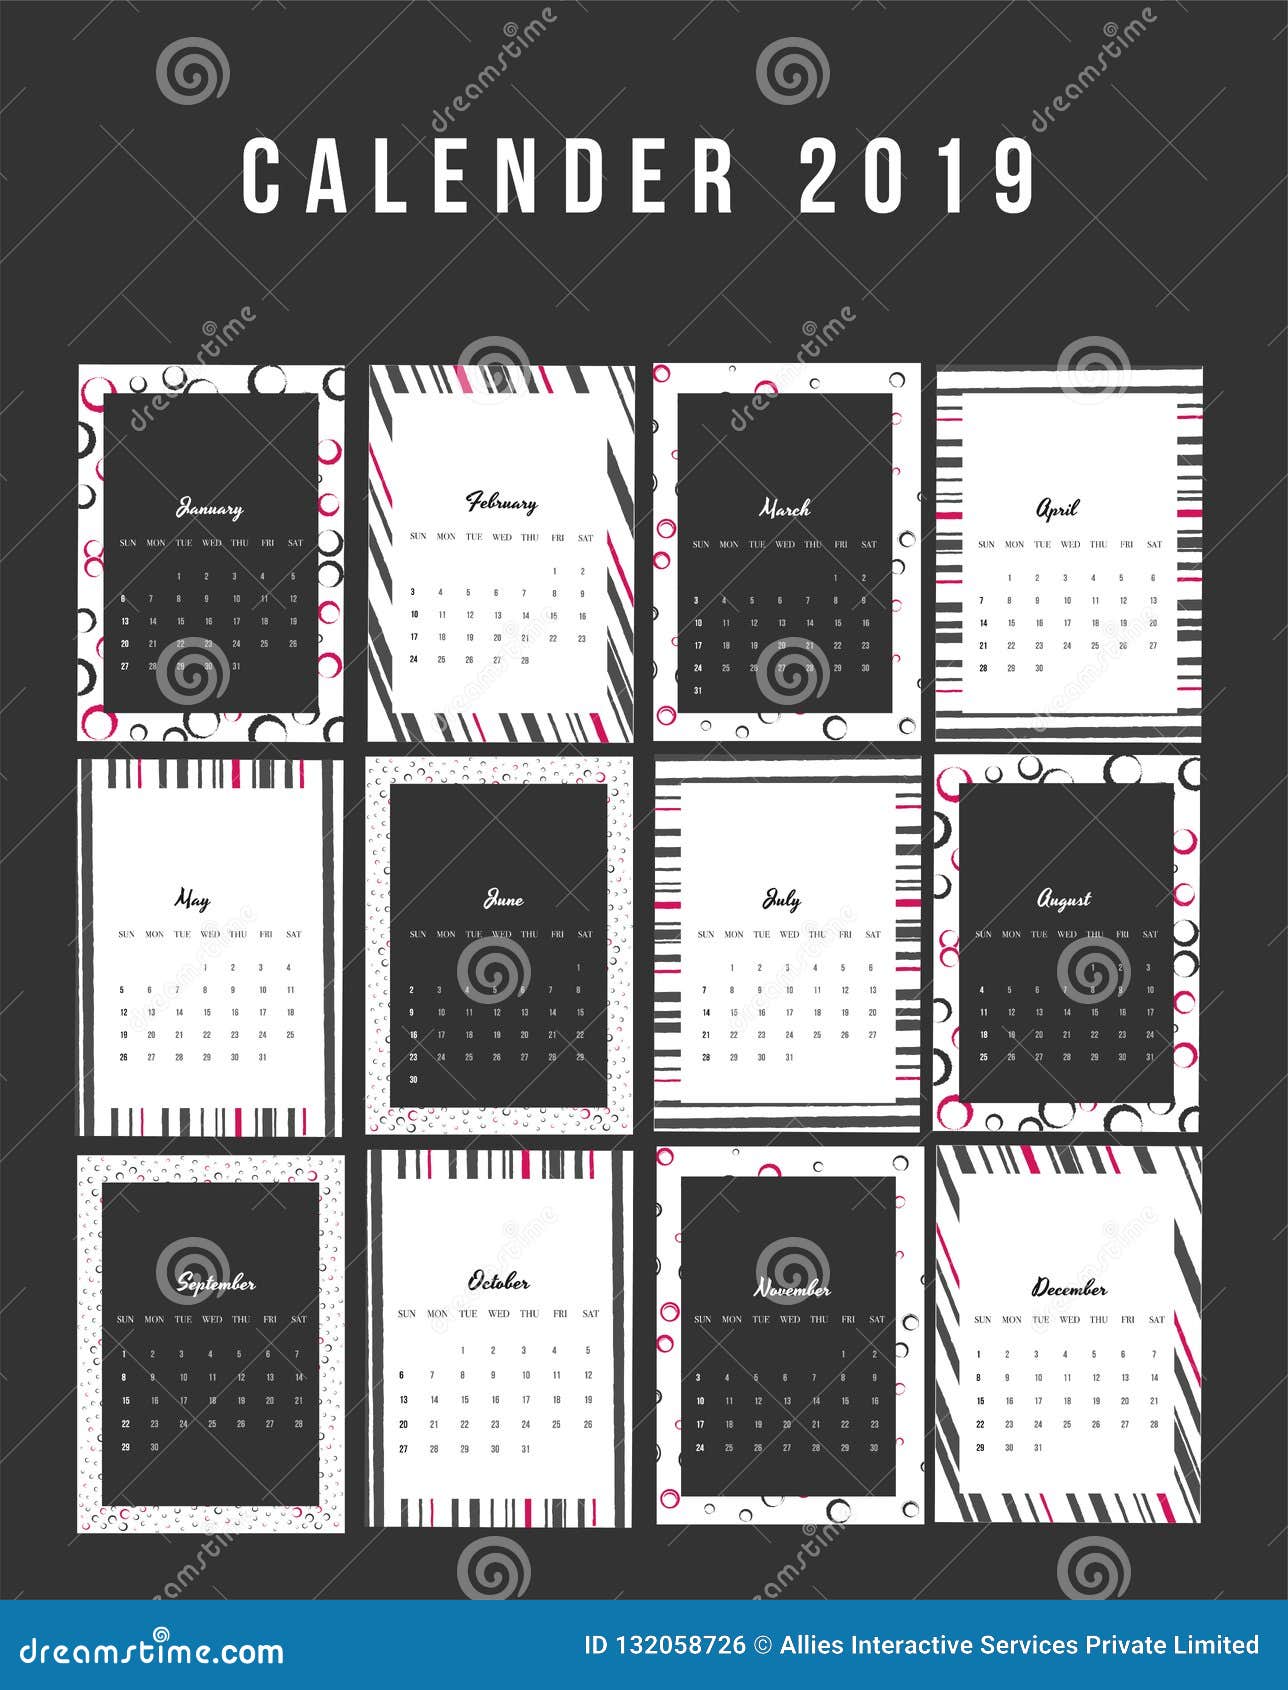 Modern Style Wall Calendar Design, Complete Set of 12 Months Planner in